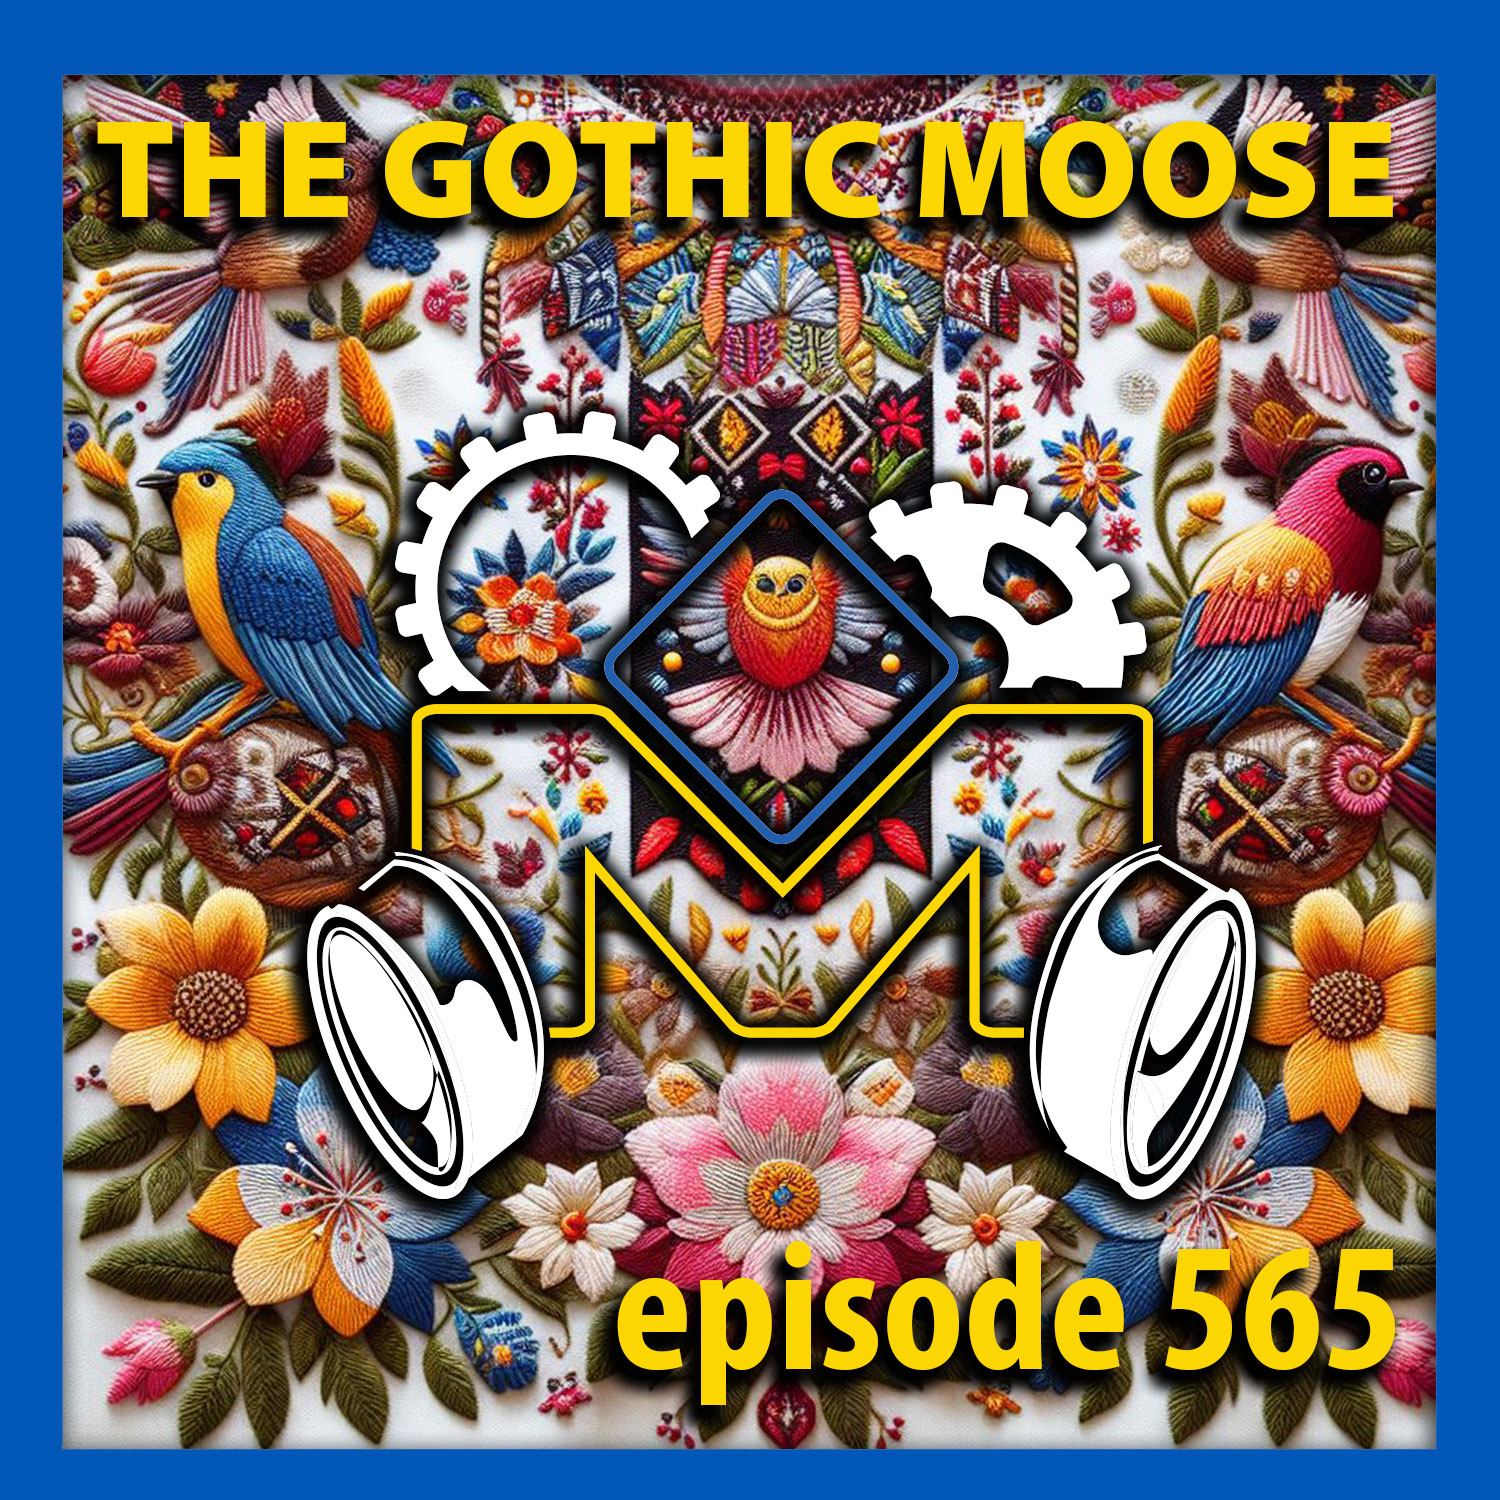 The Gothic Moose – Episode 565 – All Ukrainian bands or bands supporting Ukraine